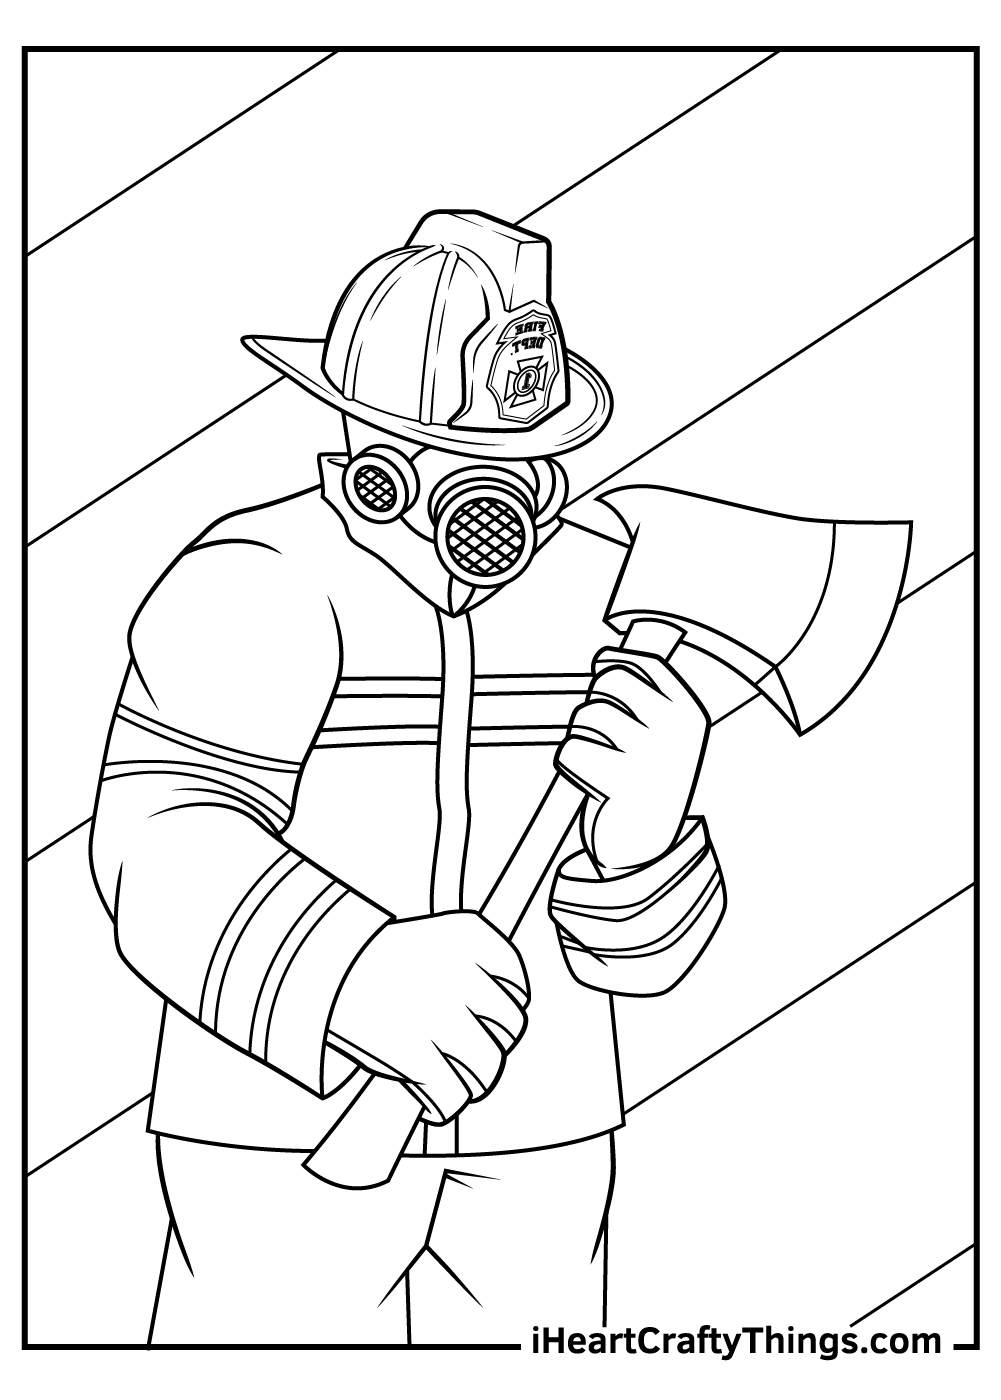 Printable Fire Department Coloring Pages (Updated 2022)